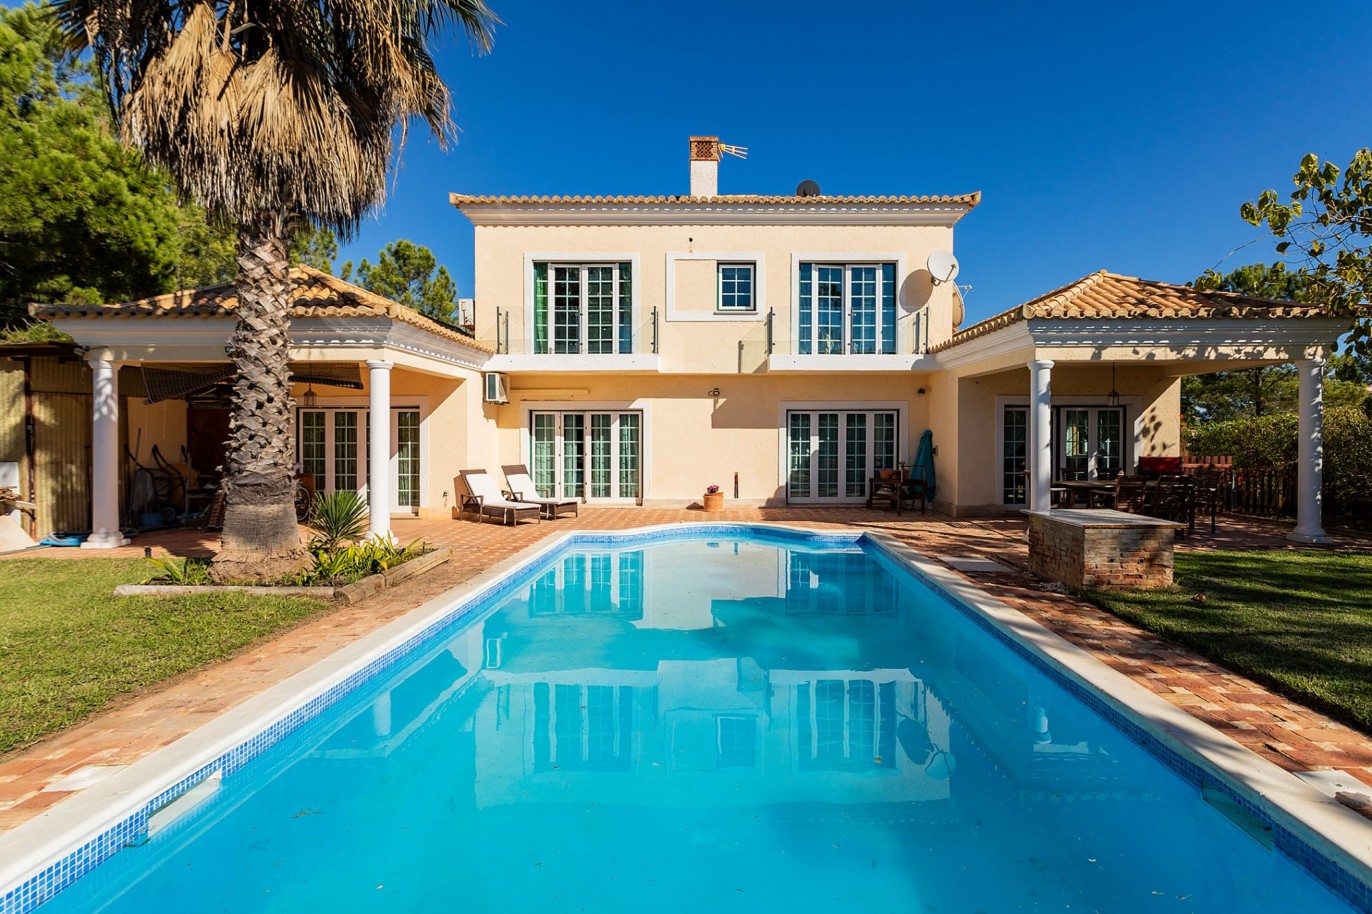 4 Bedroom Villa, with swimming pool, for sale, in Quarteira, Algarve_204074